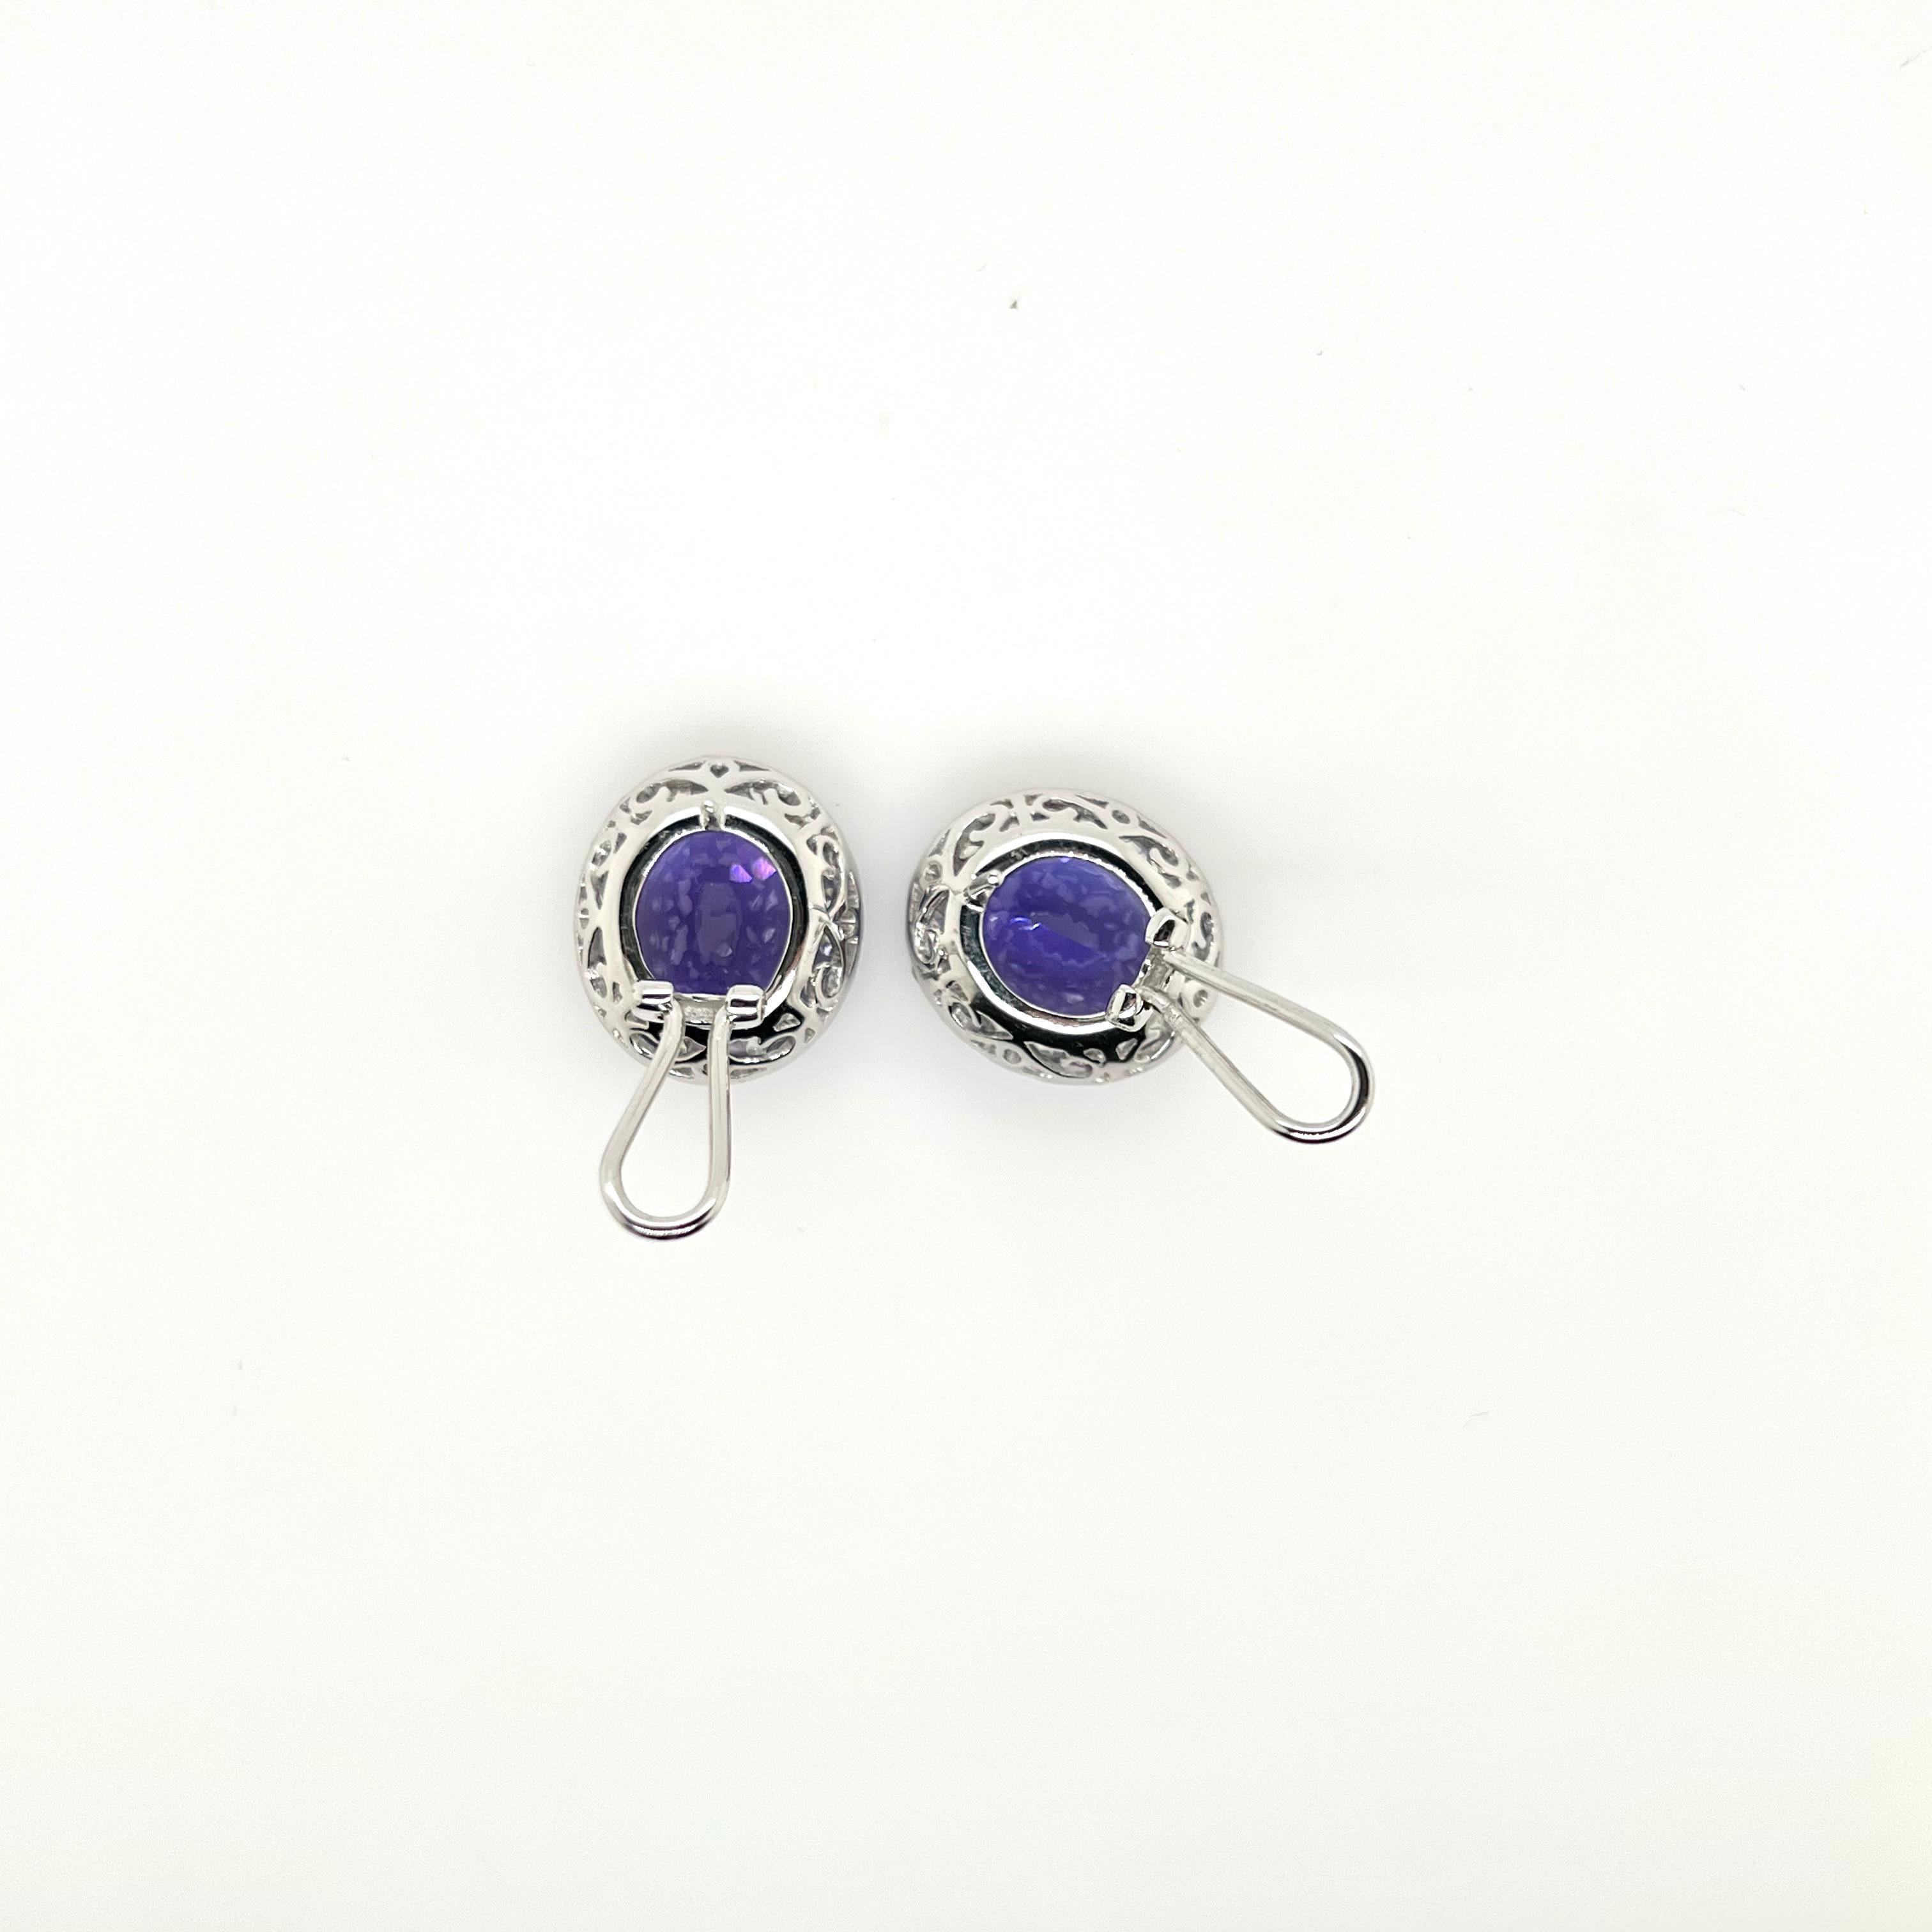 The epitome of a classic earring design!   This stunning pair of tanzanites are set in a handmade setting with round brilliant diamonds around the peripheral to give the iconic earring style!  The vibrant purple hue in the tanzanite glisten against